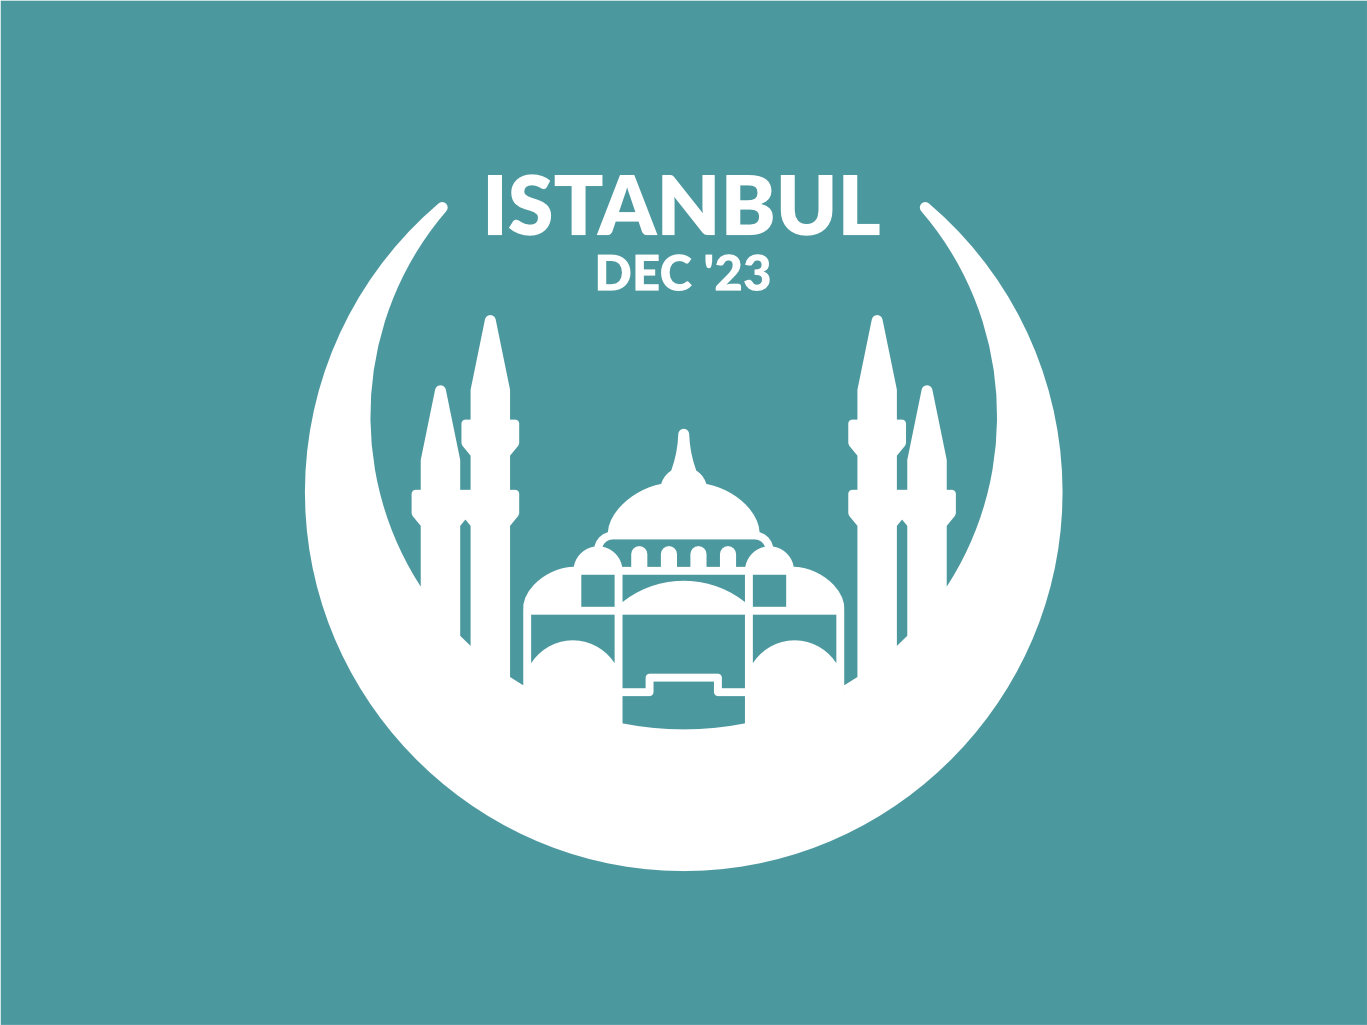 Passport style stamp for Istanbul